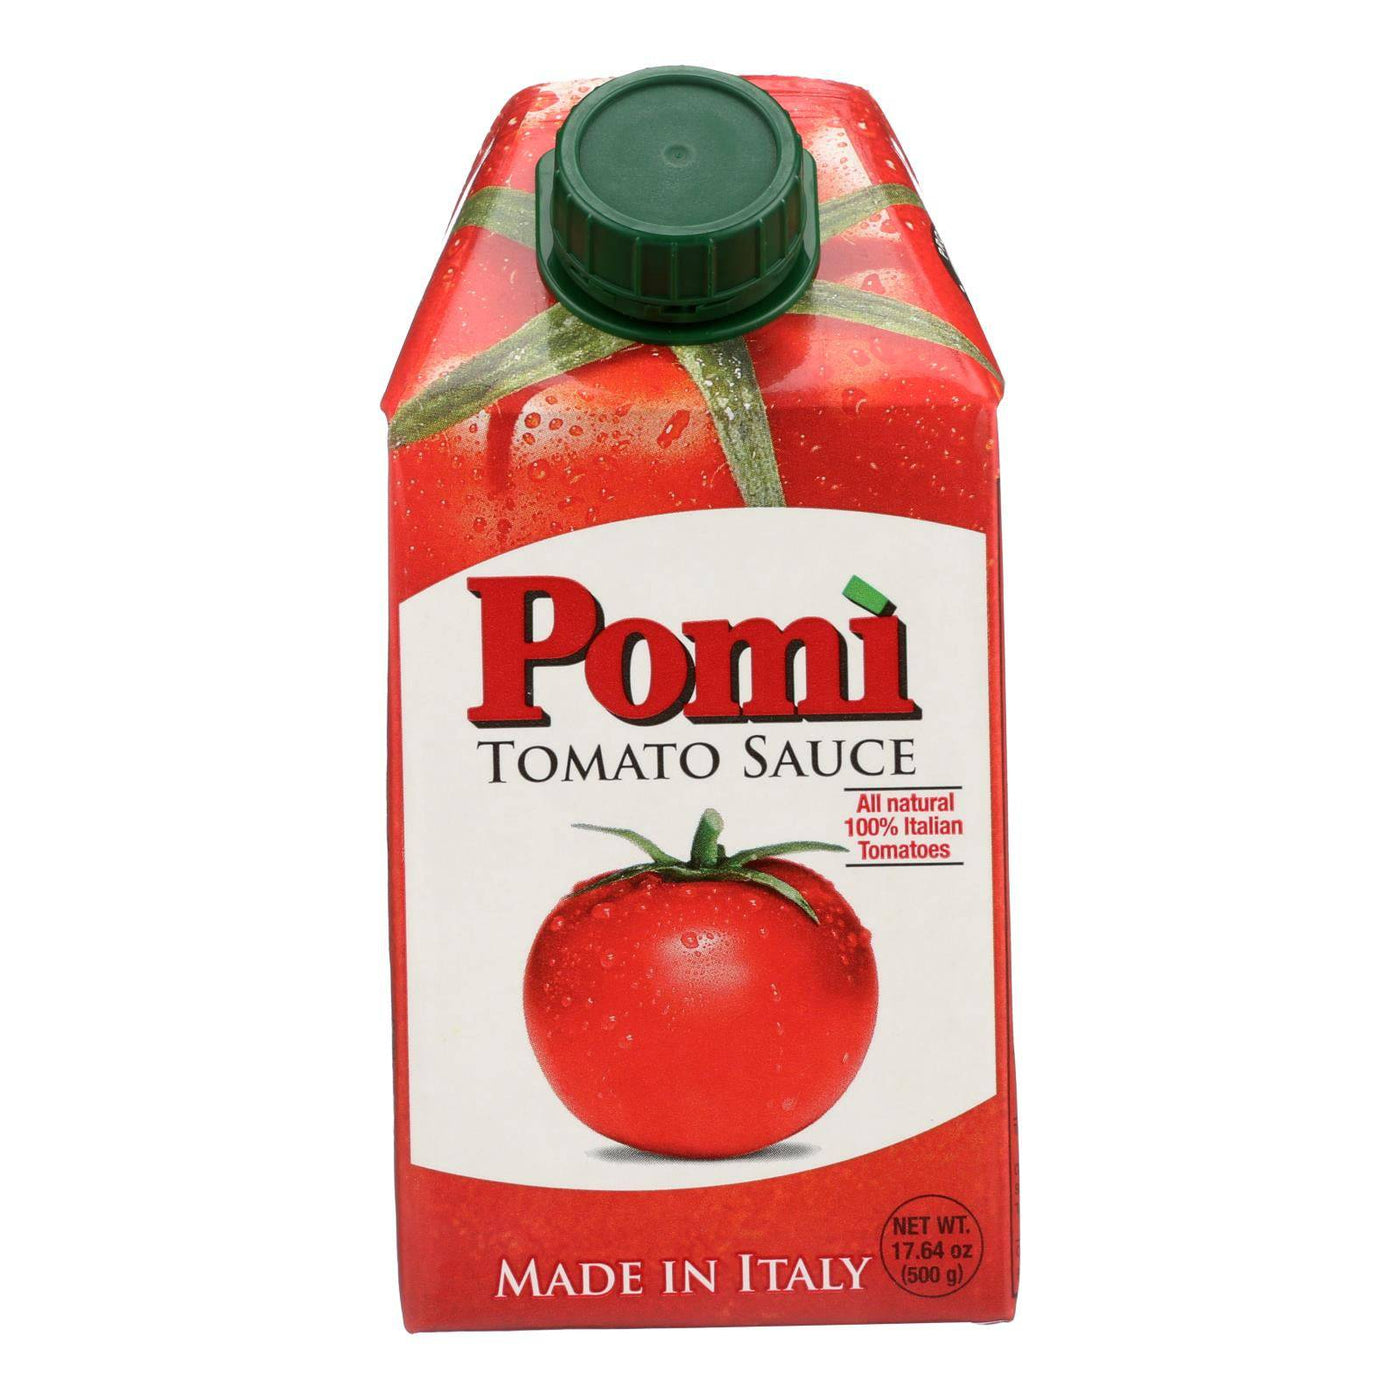 Buy Pomi Tomatoes Tomato Sauce - Case Of 12 - 17.64 Fl Oz.  at OnlyNaturals.us